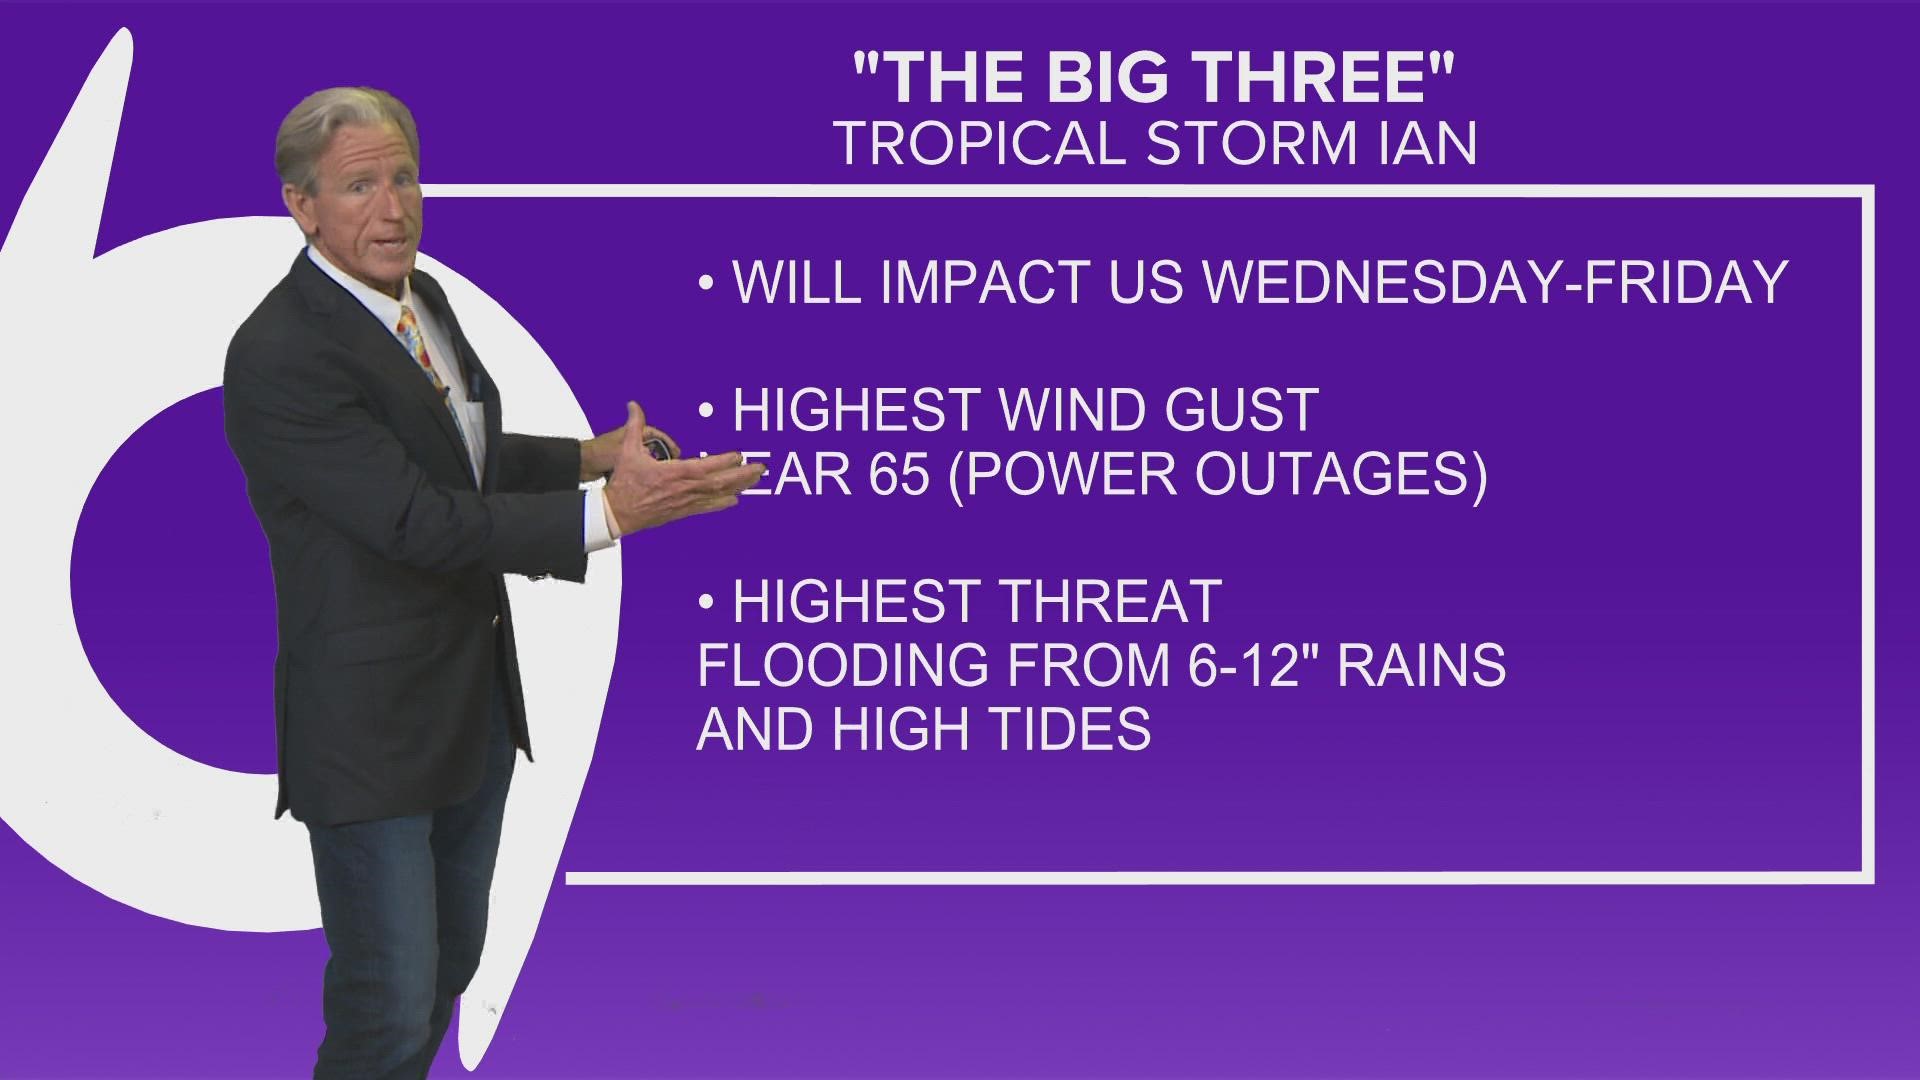 The highest threat to the First Coast is flooding, with 6" to 12" of rain expected and an already high tide.